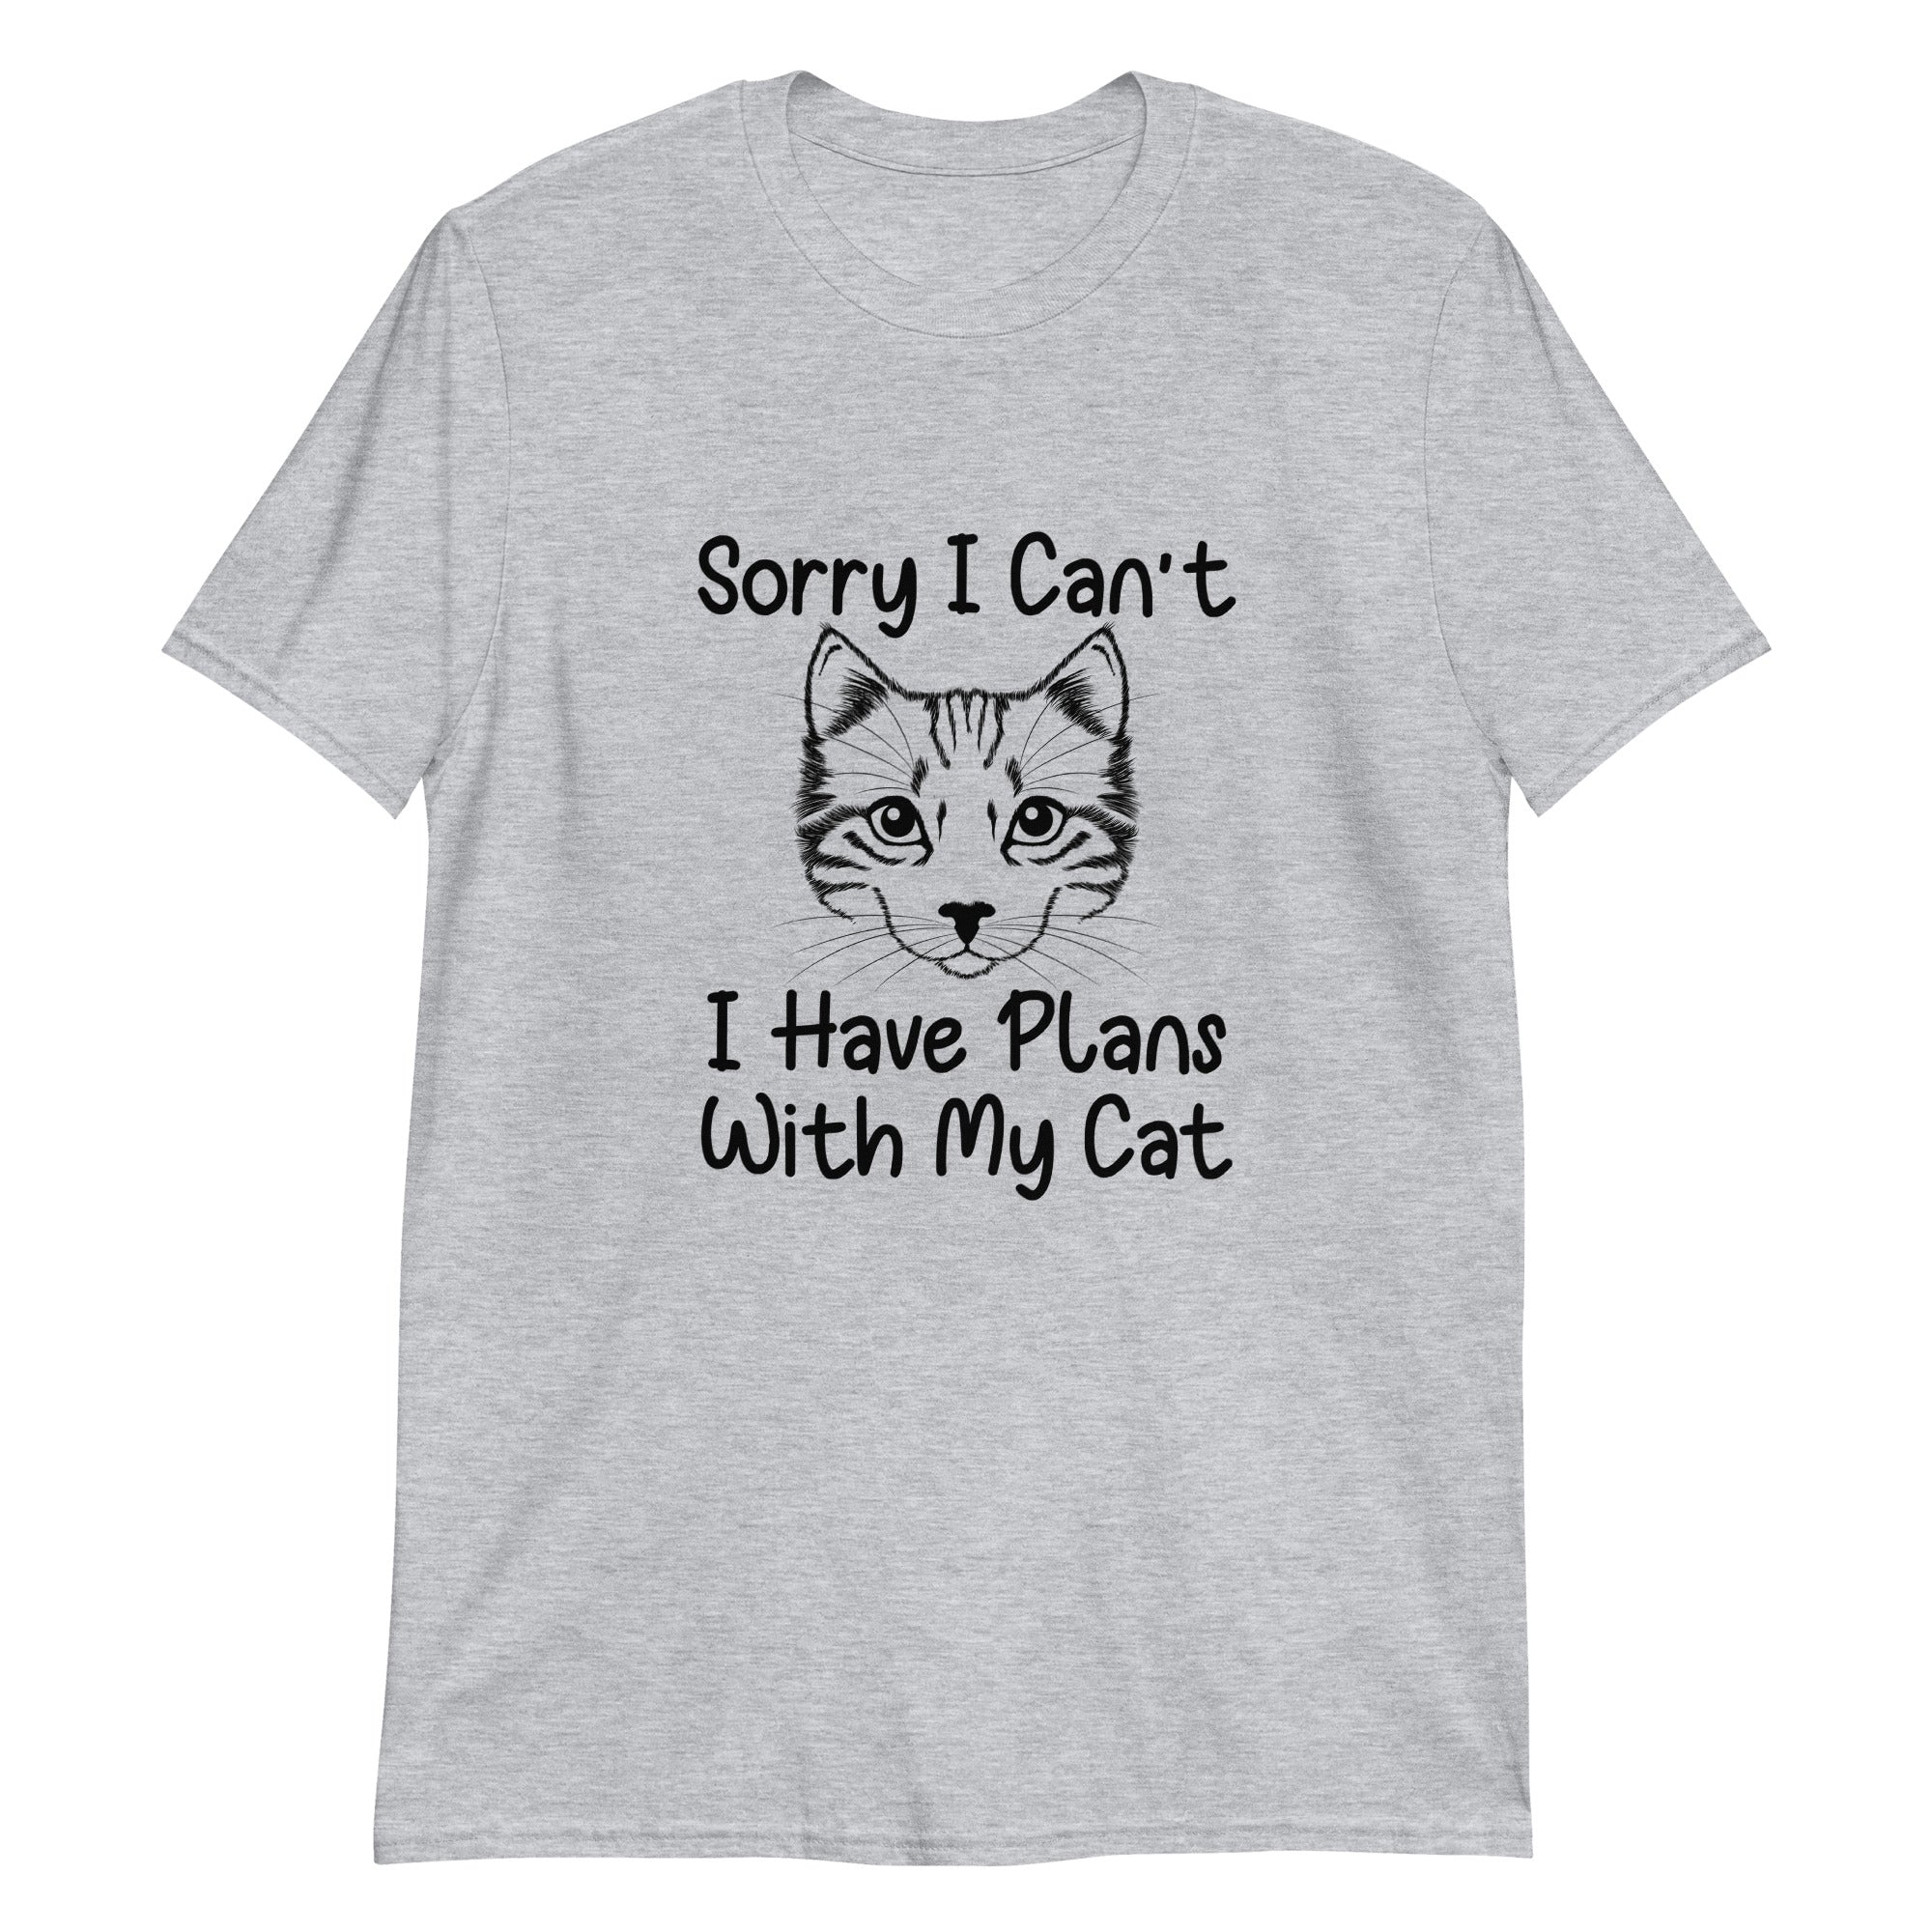 Plans with my Cat Short-Sleeve Unisex T-Shirt